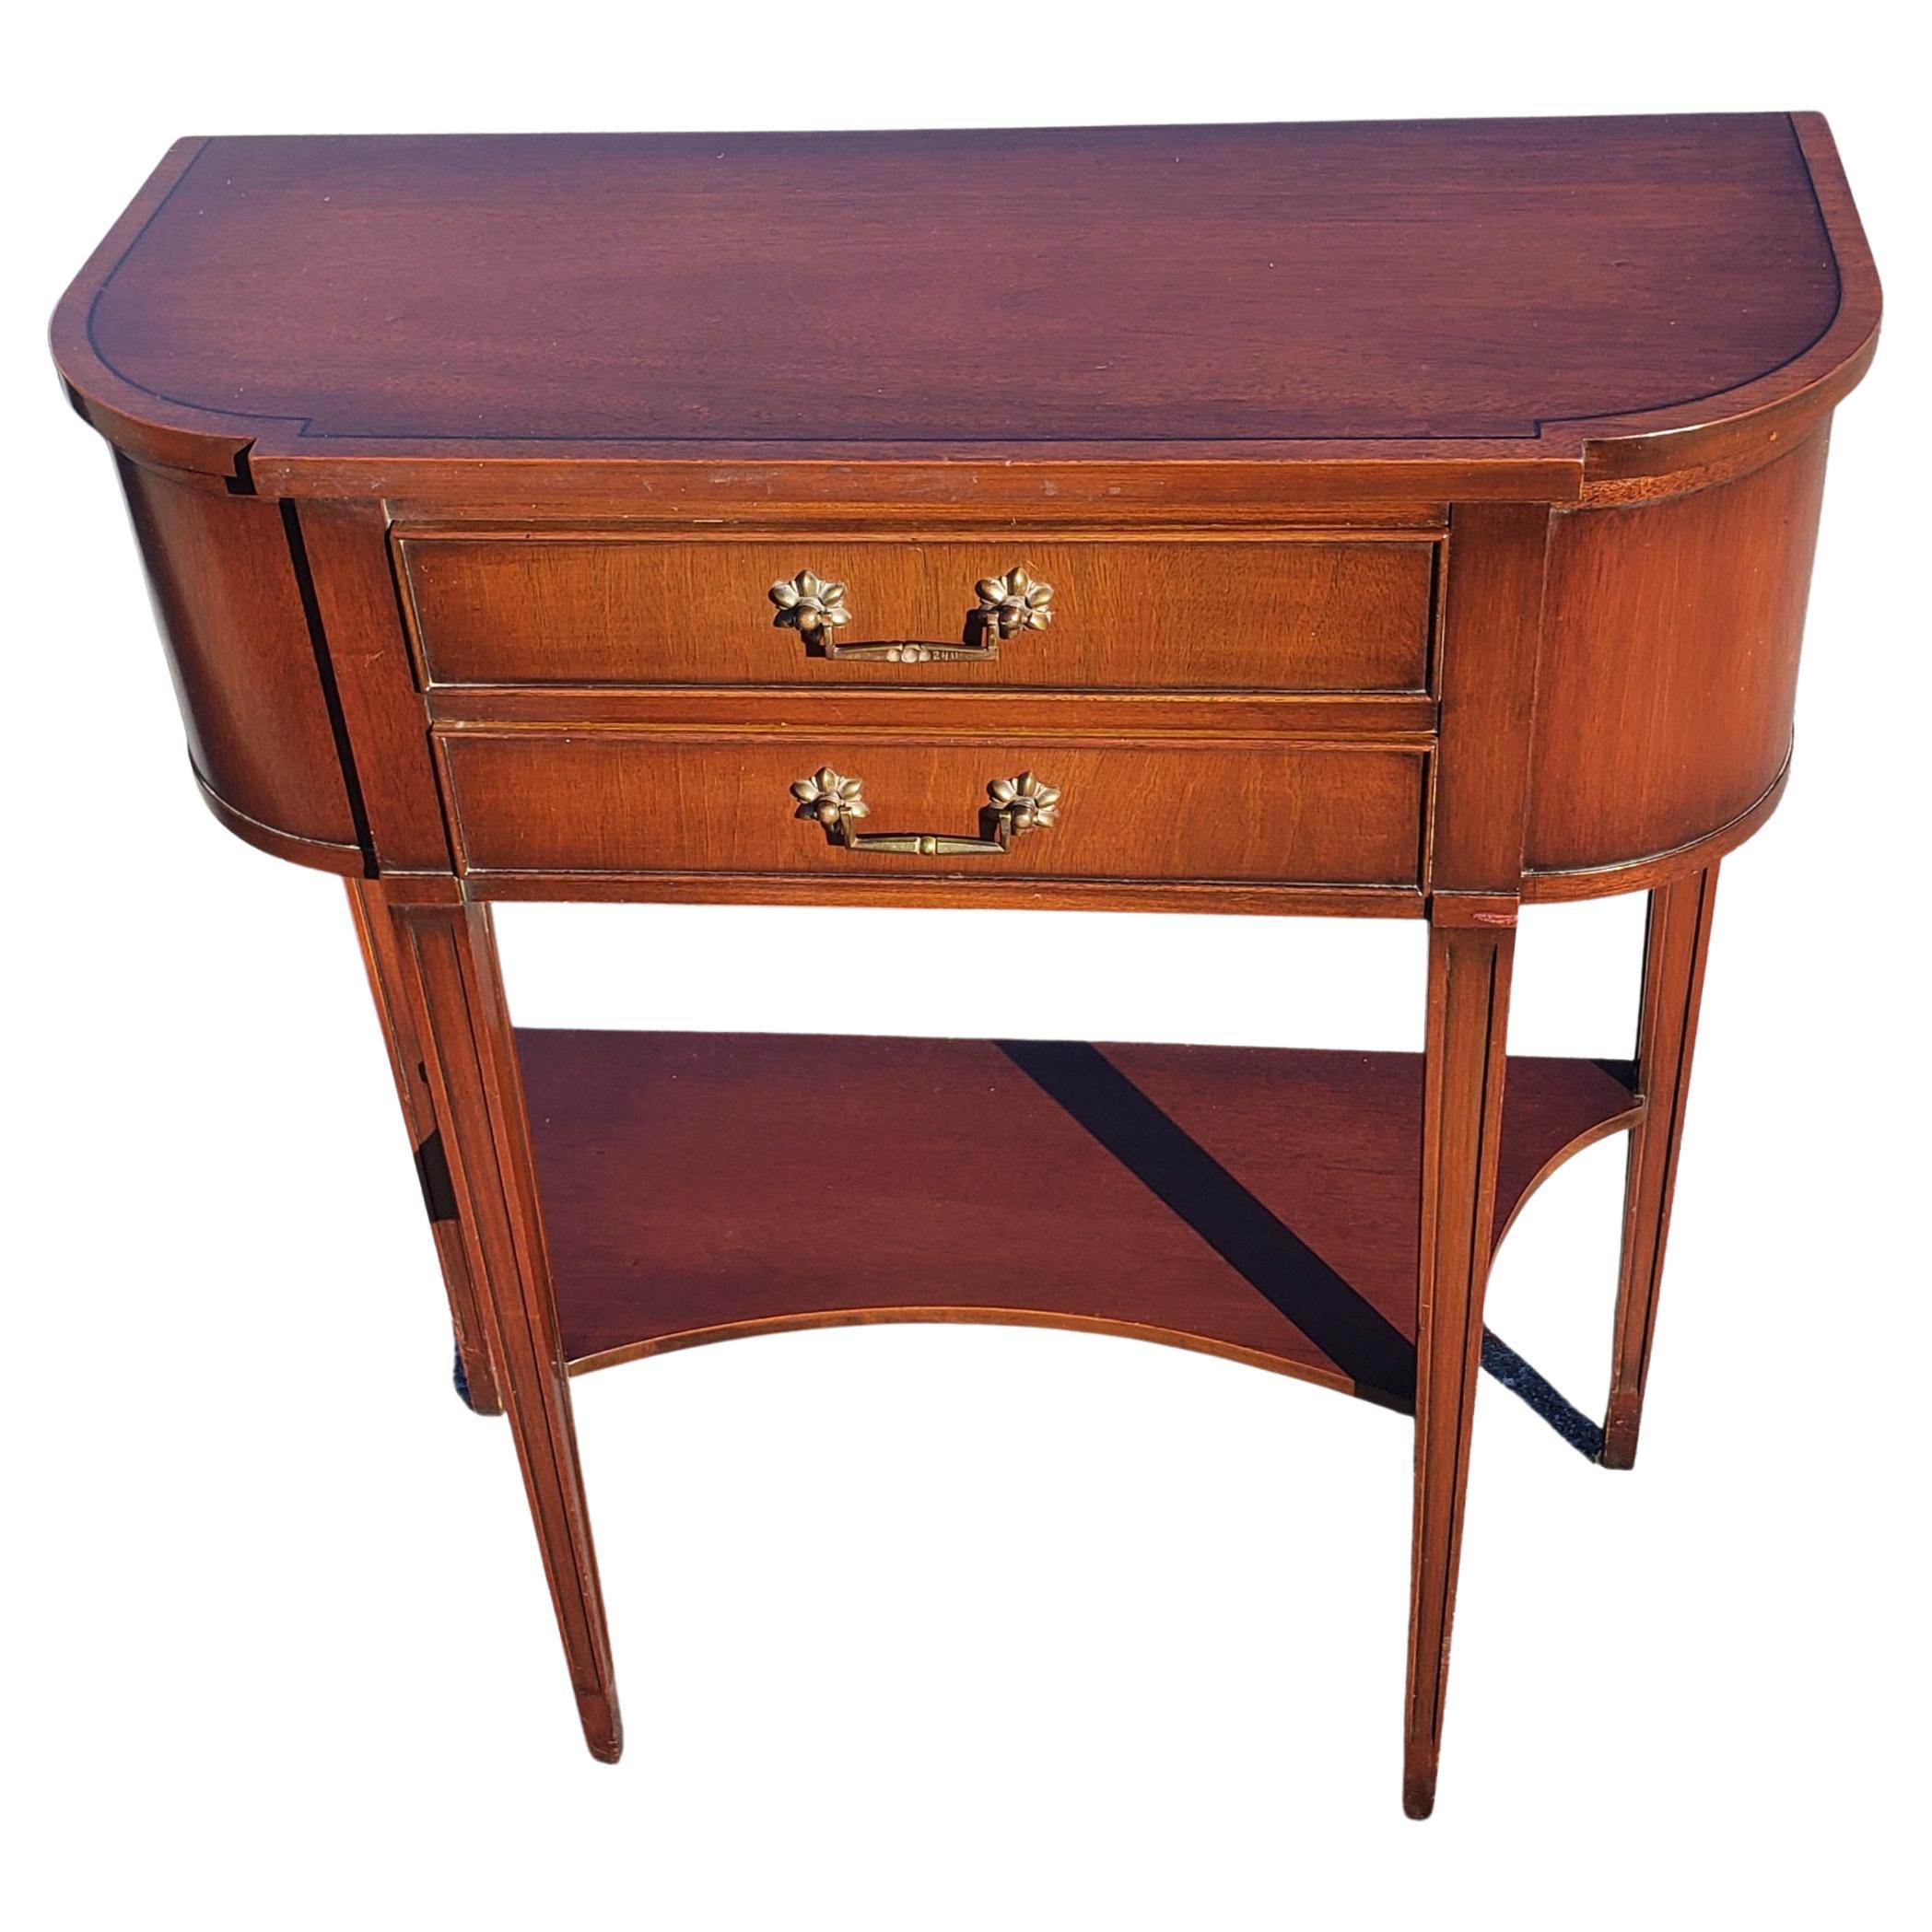 Brass Pair of Tier 2-Drawer Banded Mahogany Regency Console Tables, Circa 1940s